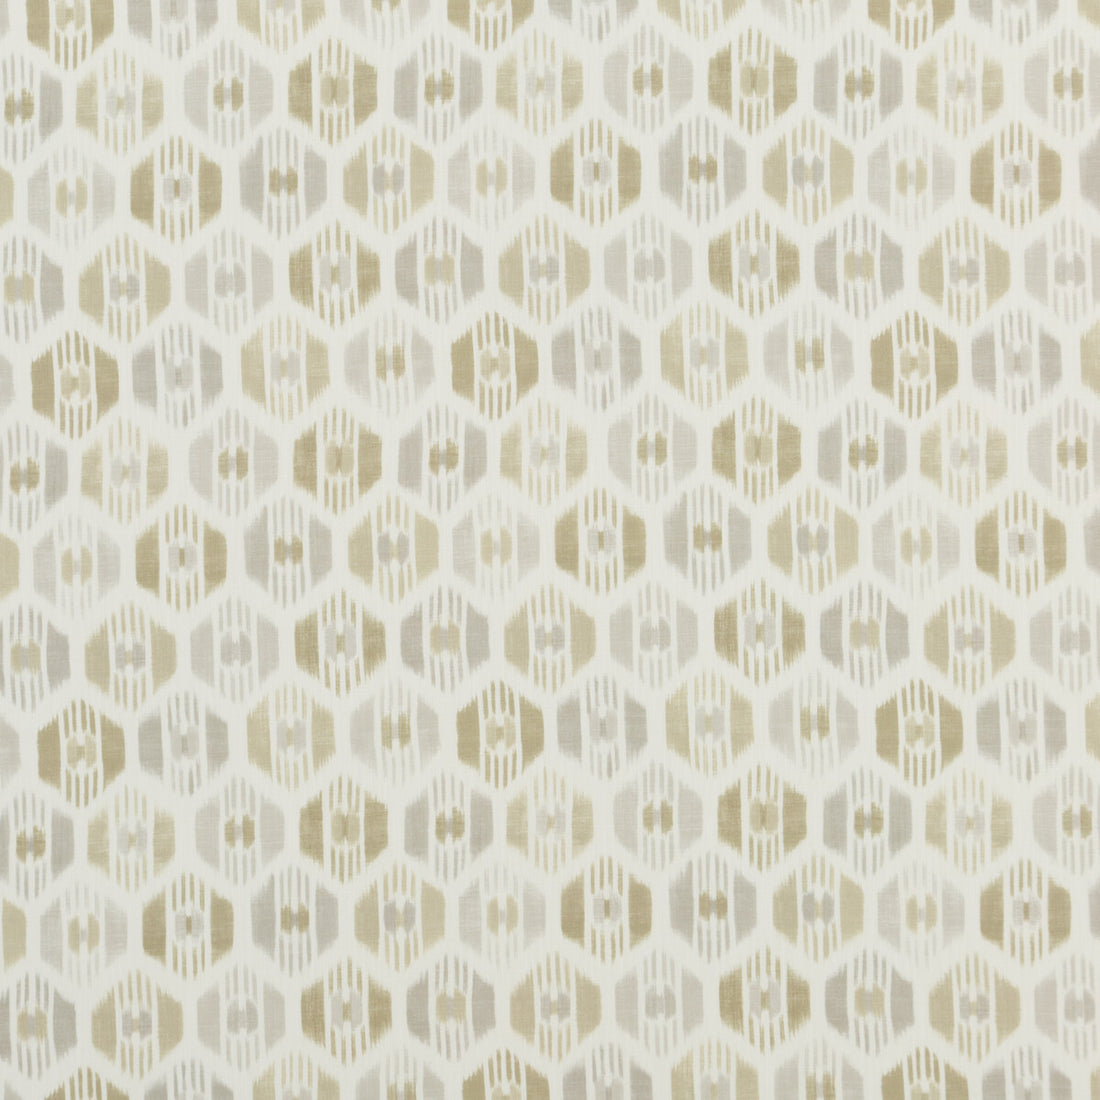 Caribana fabric in stone color - pattern PP50433.1.0 - by Baker Lifestyle in the Carnival collection